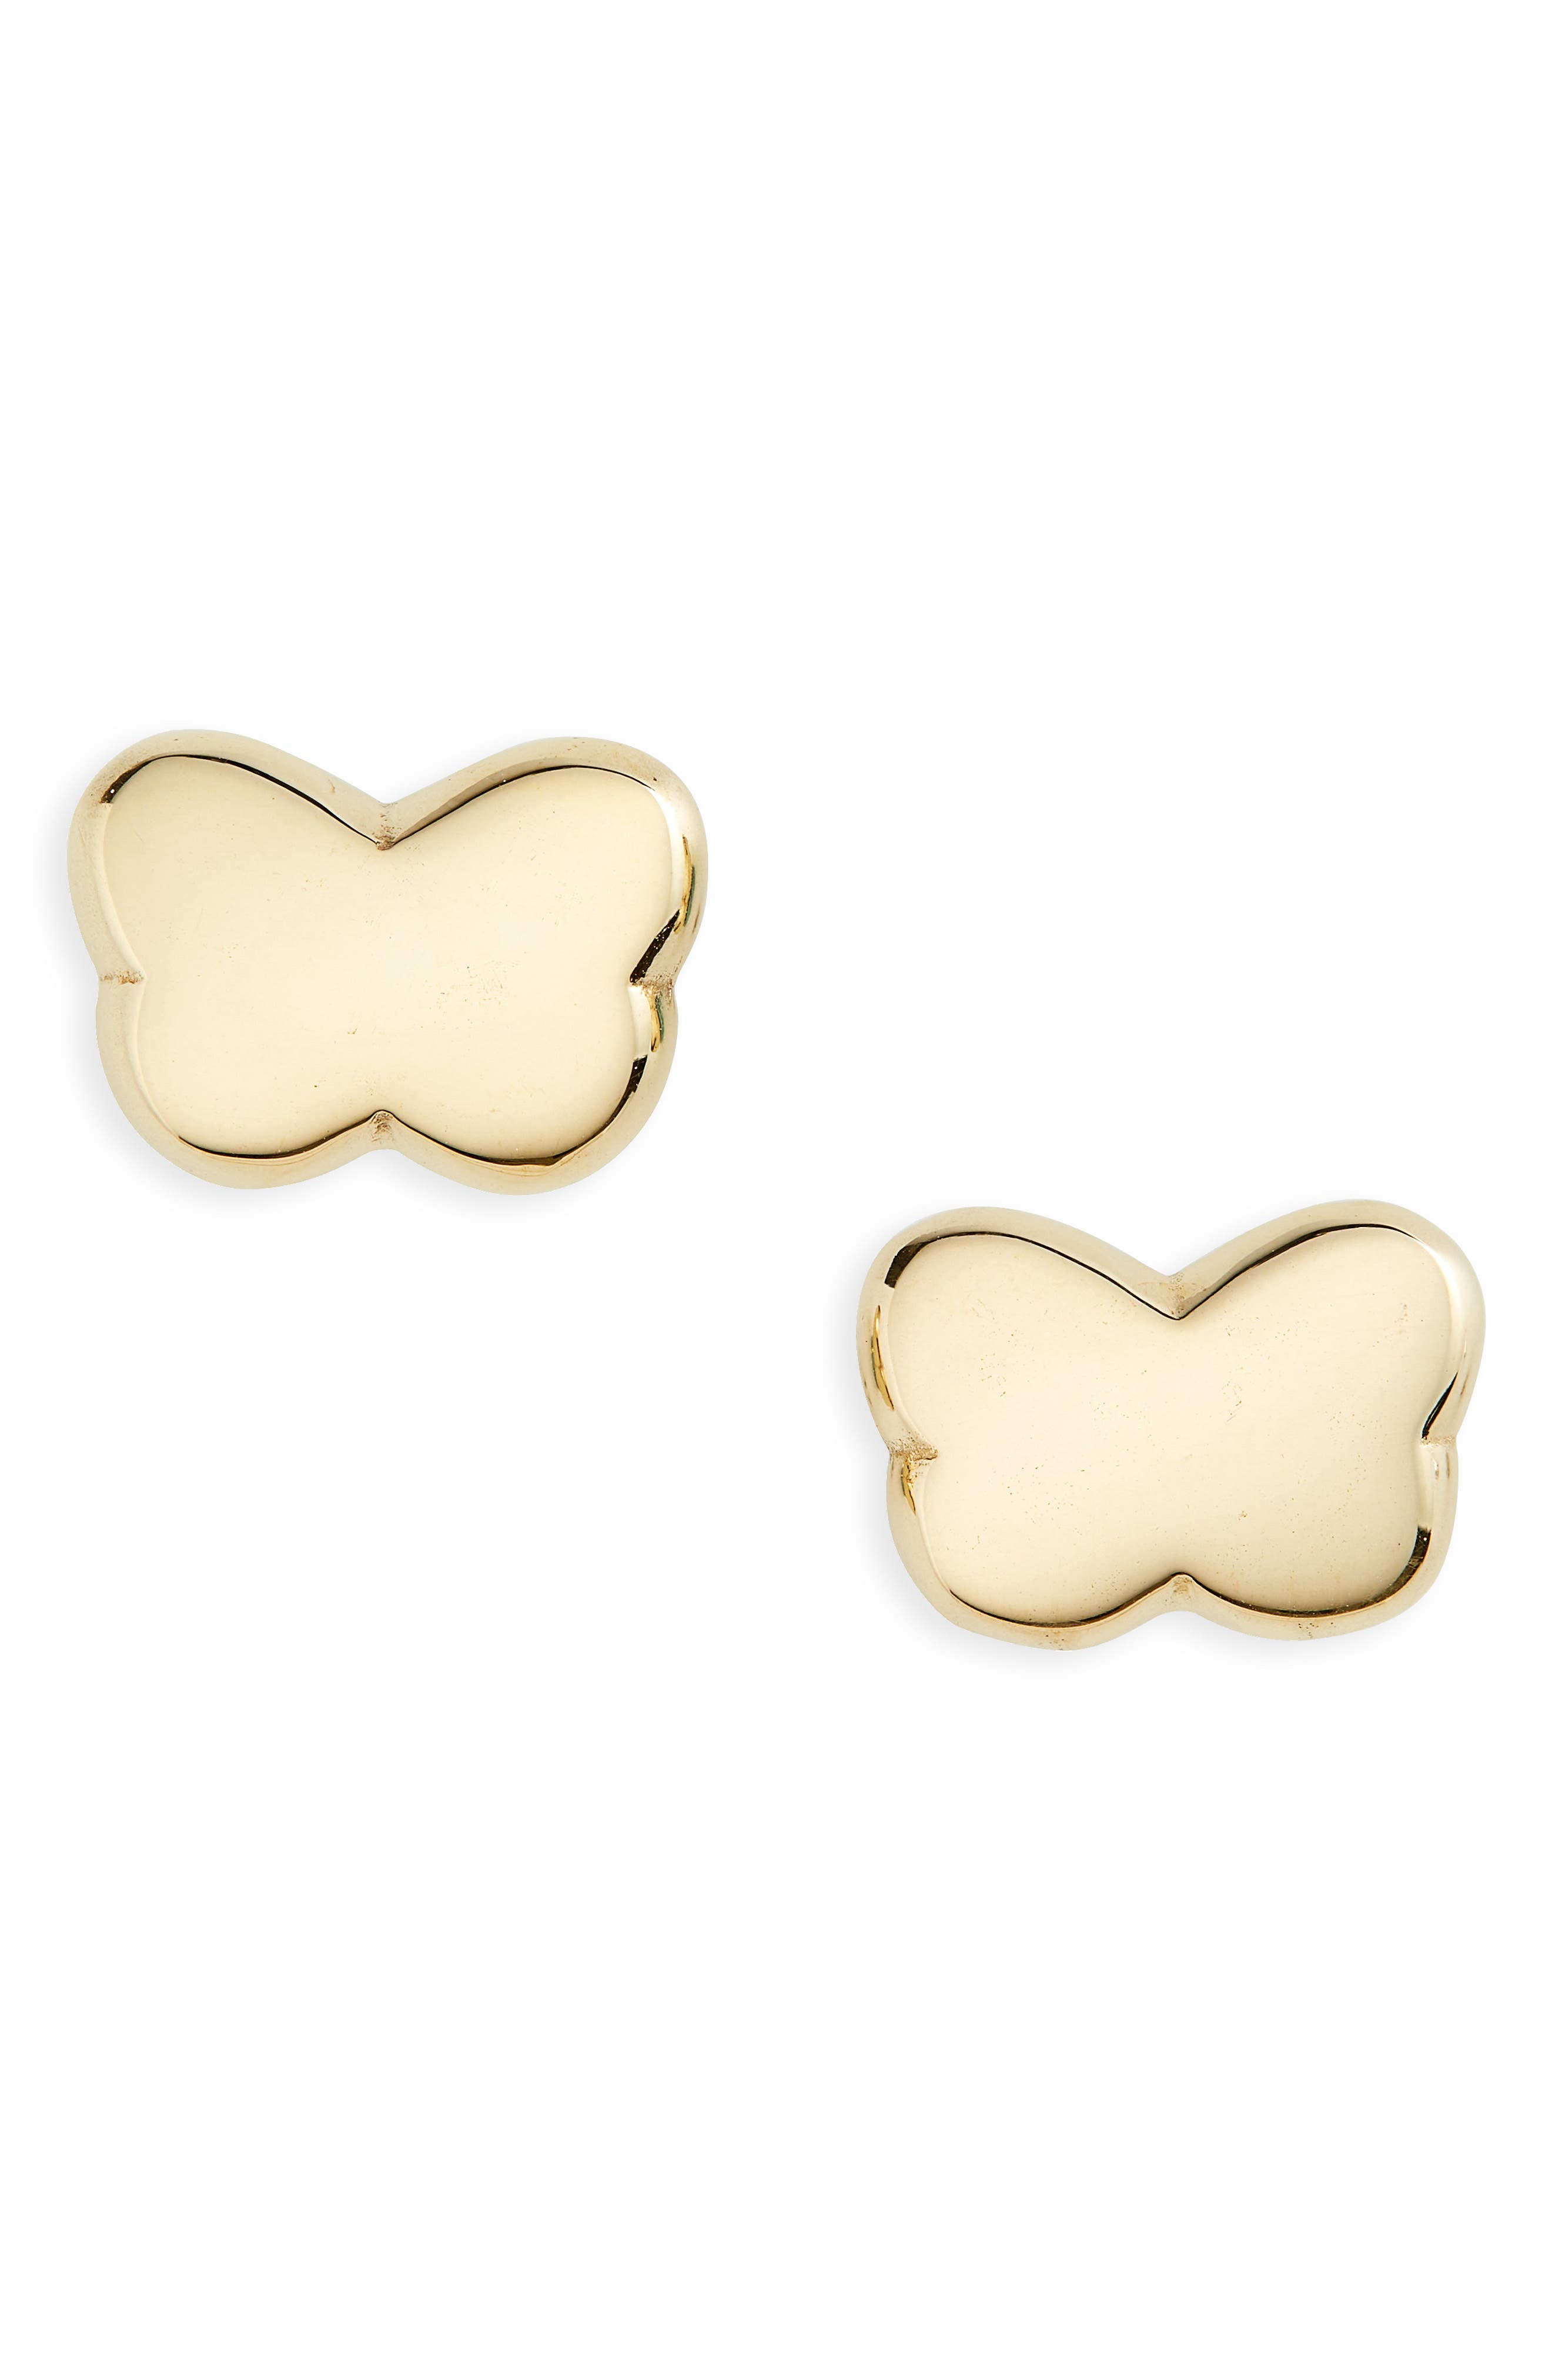 Laura Lombardi Noemi Butterfly Stud Earrings in Raw Brass With 14Kt Gold Fill at Nordstrom